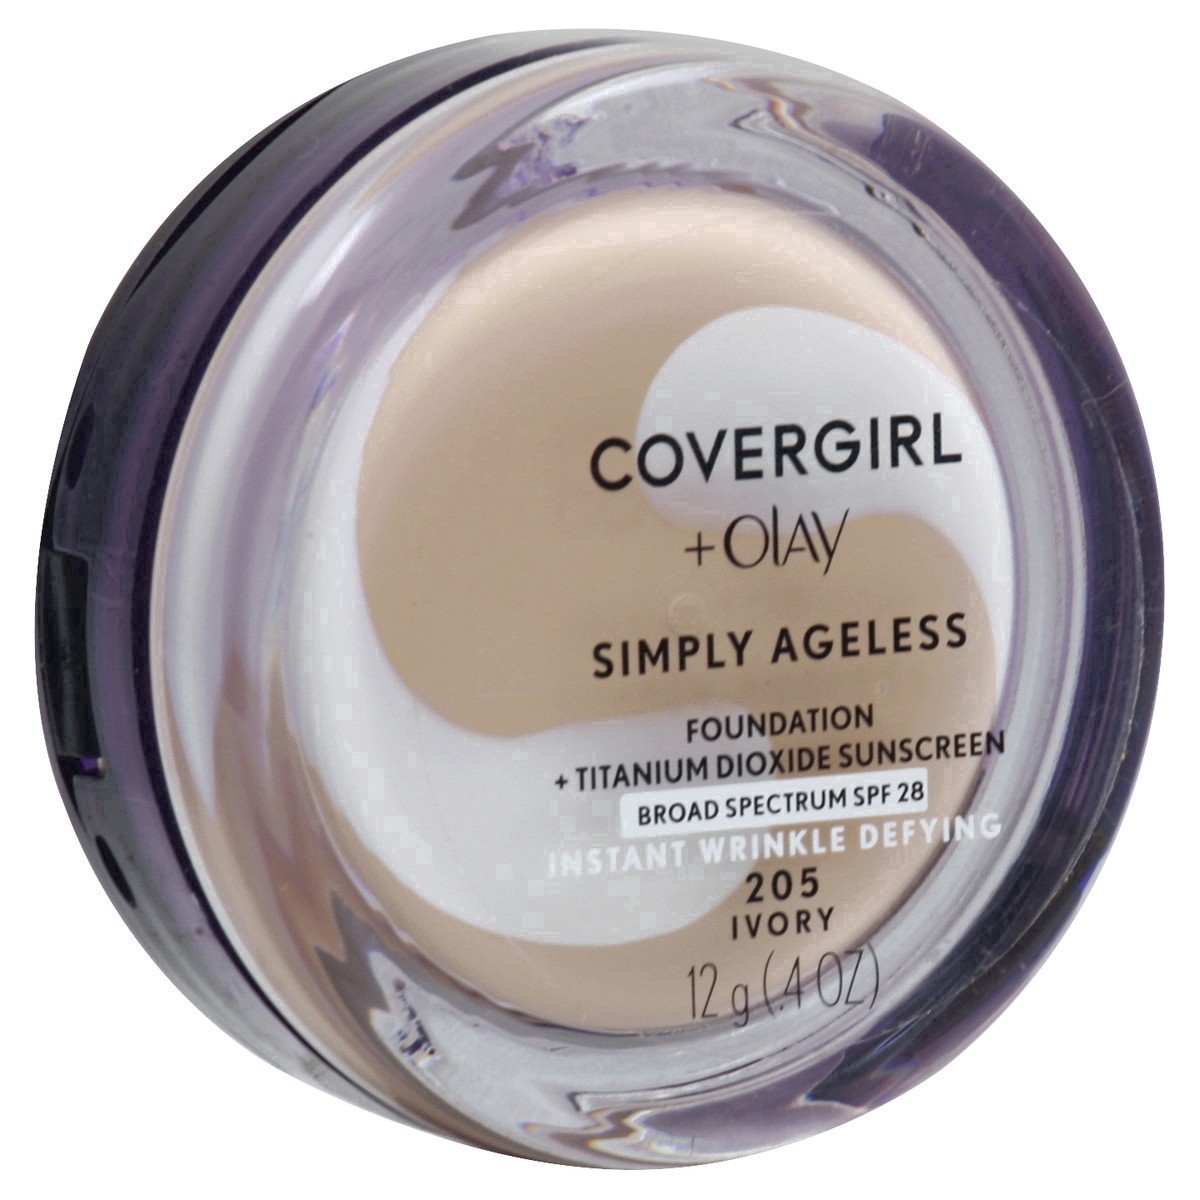 slide 21 of 21, Covergirl + Olay Simply Ageless Instant Wrinkle Defying Foundation, Ivory, 0.4 oz